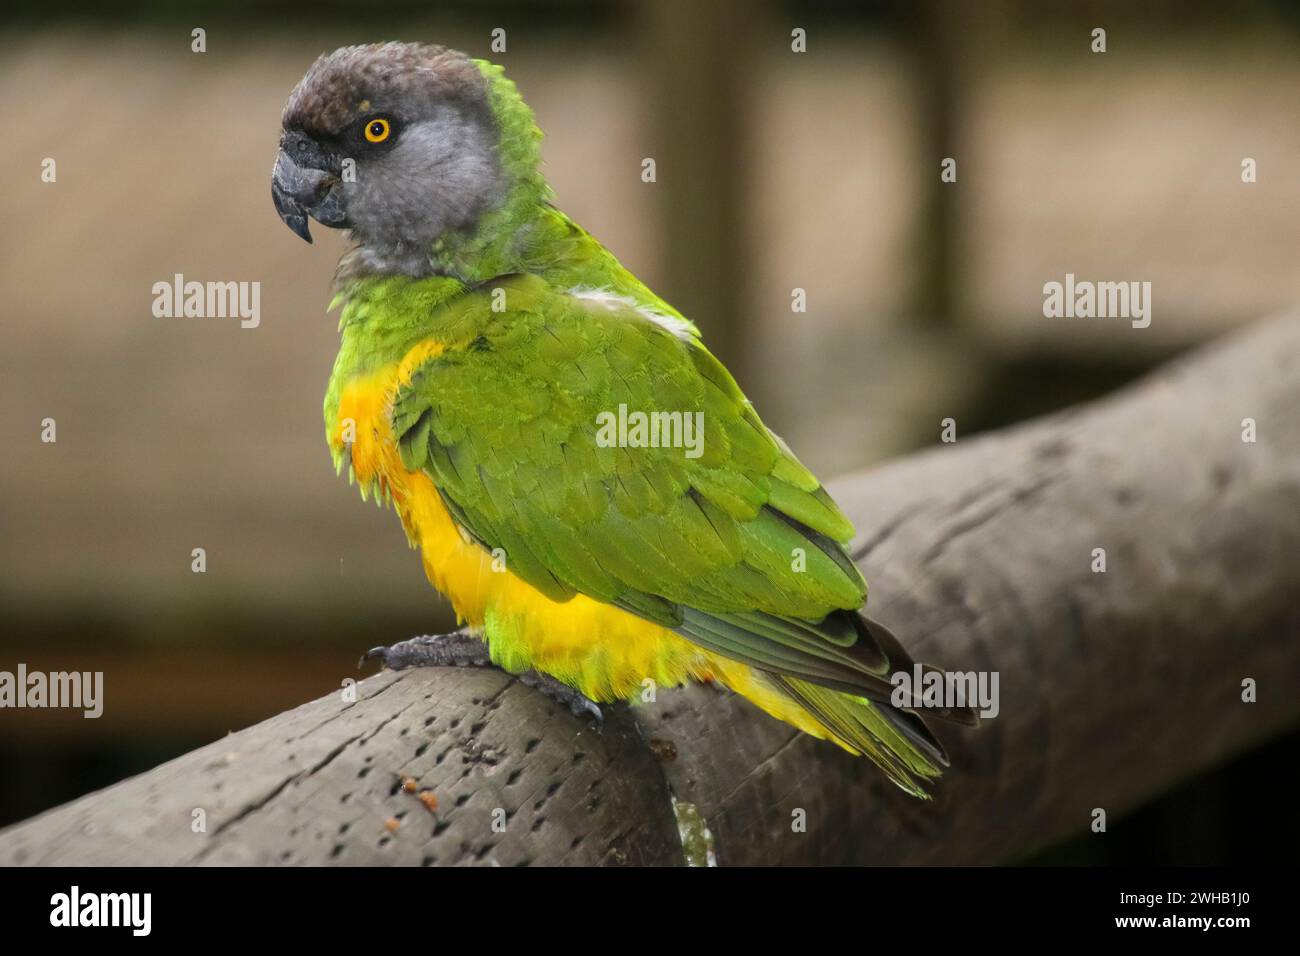 The Senegal parrot (Poicephalus senegalus) is a parrot which is a resident breeder across a wide range of west Africa. at Birds of eden, free flight b Stock Photo